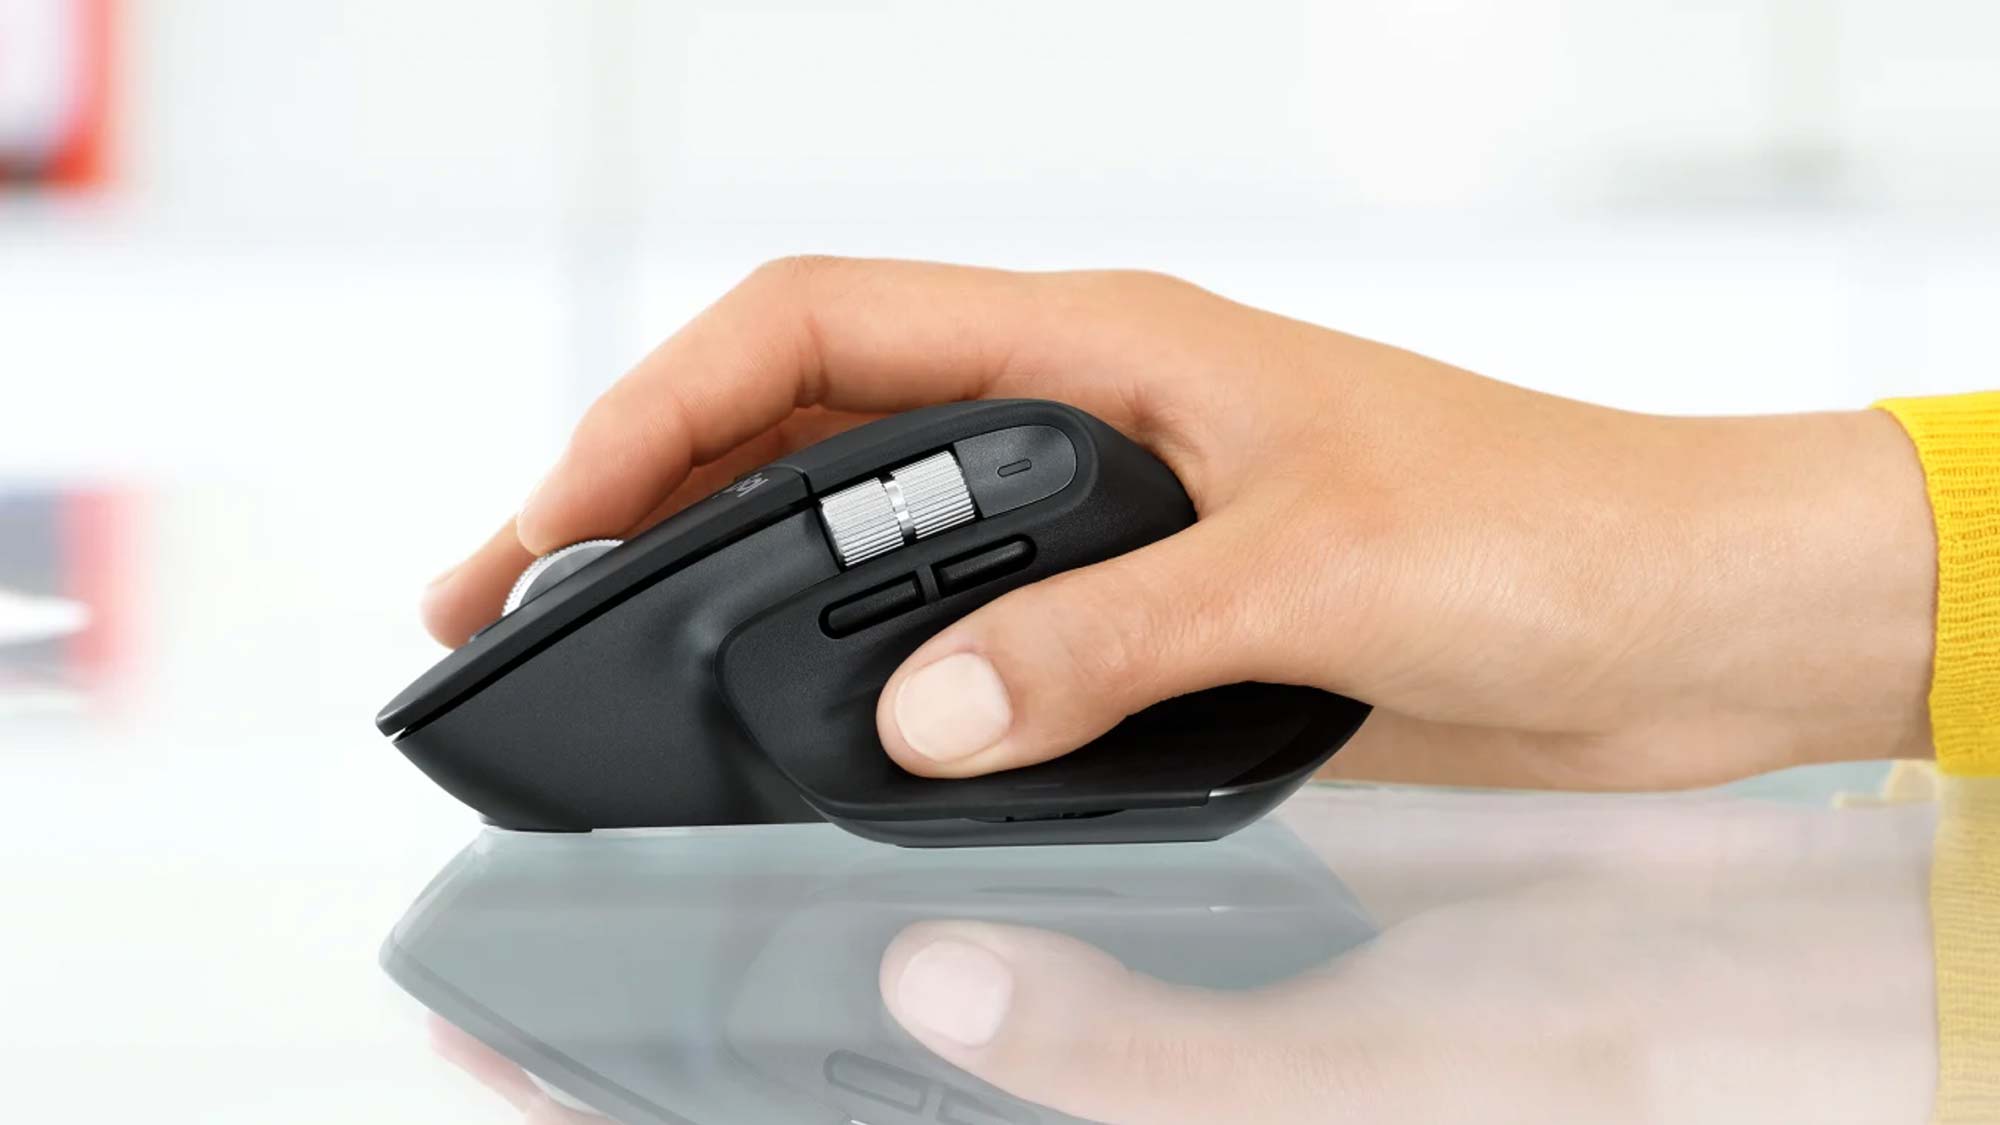 Review: Logitech M325 USB Wireless Mouse Is Portable, Dependable and Usable